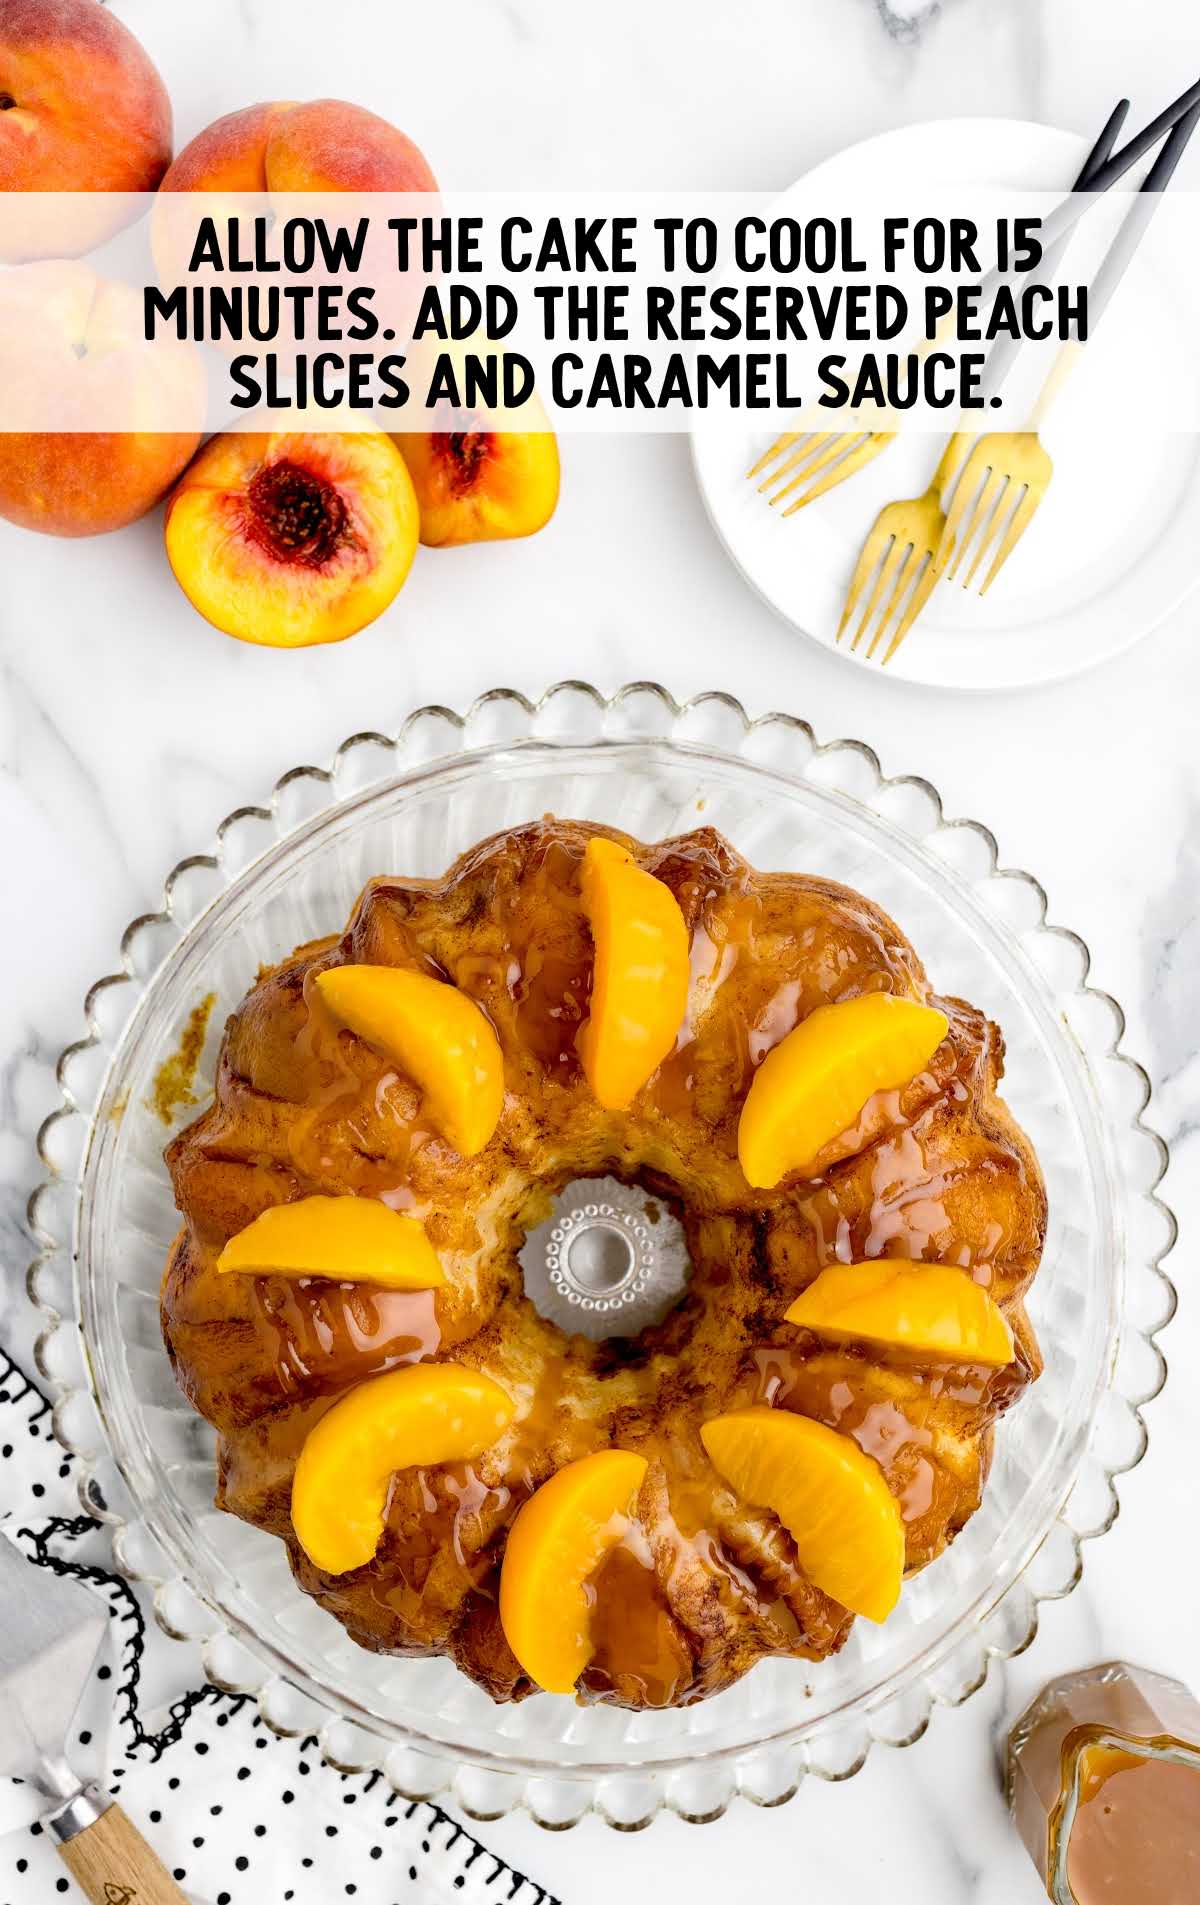 Peach Cobbler Pound Cake cooling on a cake a serving plate